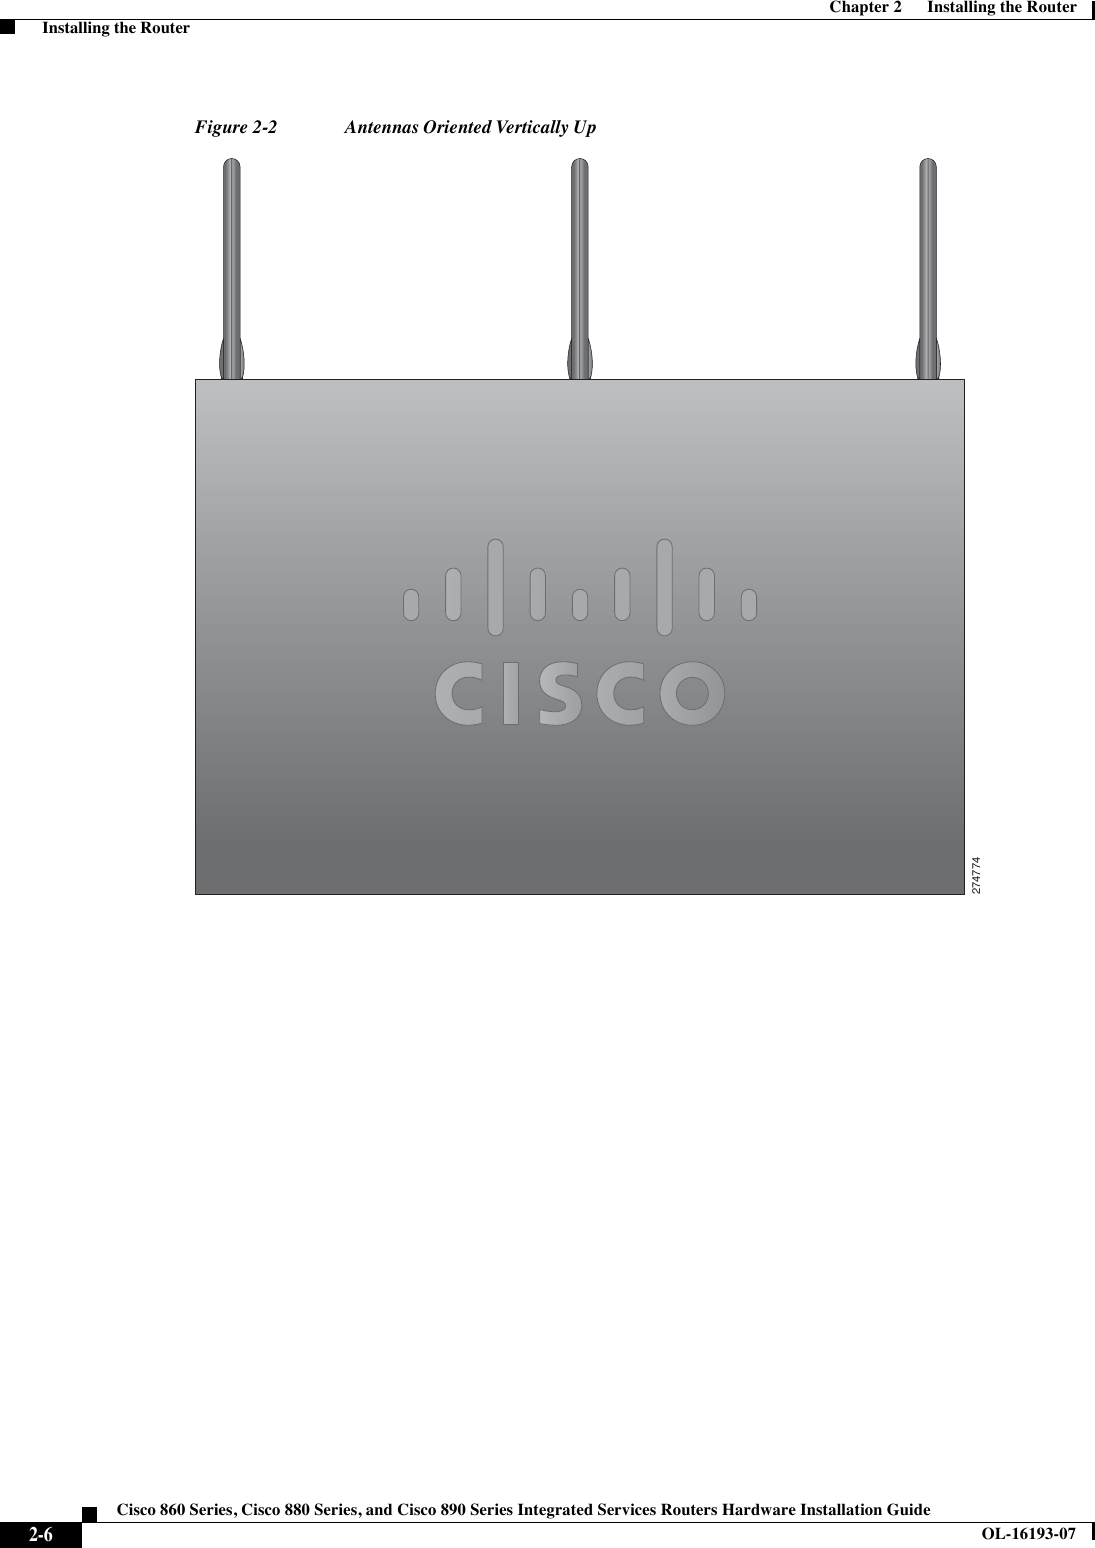  2-6Cisco 860 Series, Cisco 880 Series, and Cisco 890 Series Integrated Services Routers Hardware Installation GuideOL-16193-07Chapter 2      Installing the Router  Installing the RouterFigure 2-2 Antennas Oriented Vertically Up274774